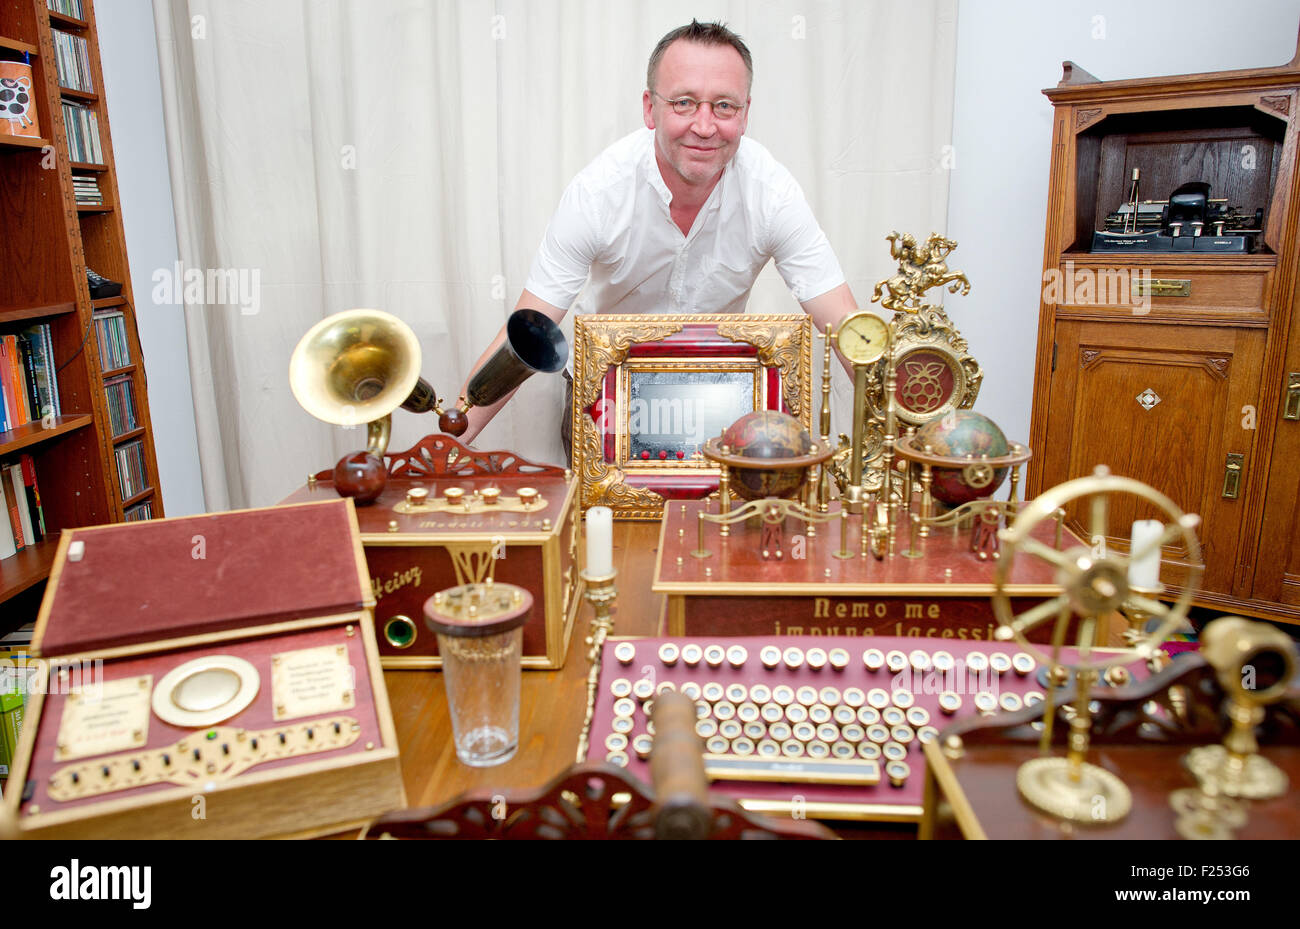 Inventor Joachim Buff with some of his creations in Frankfurt am Main,  Germany, 25 August 2015. The hobby is referred to as Steampunk and combines  an historical aesthetic with modern technology. PHOTO: